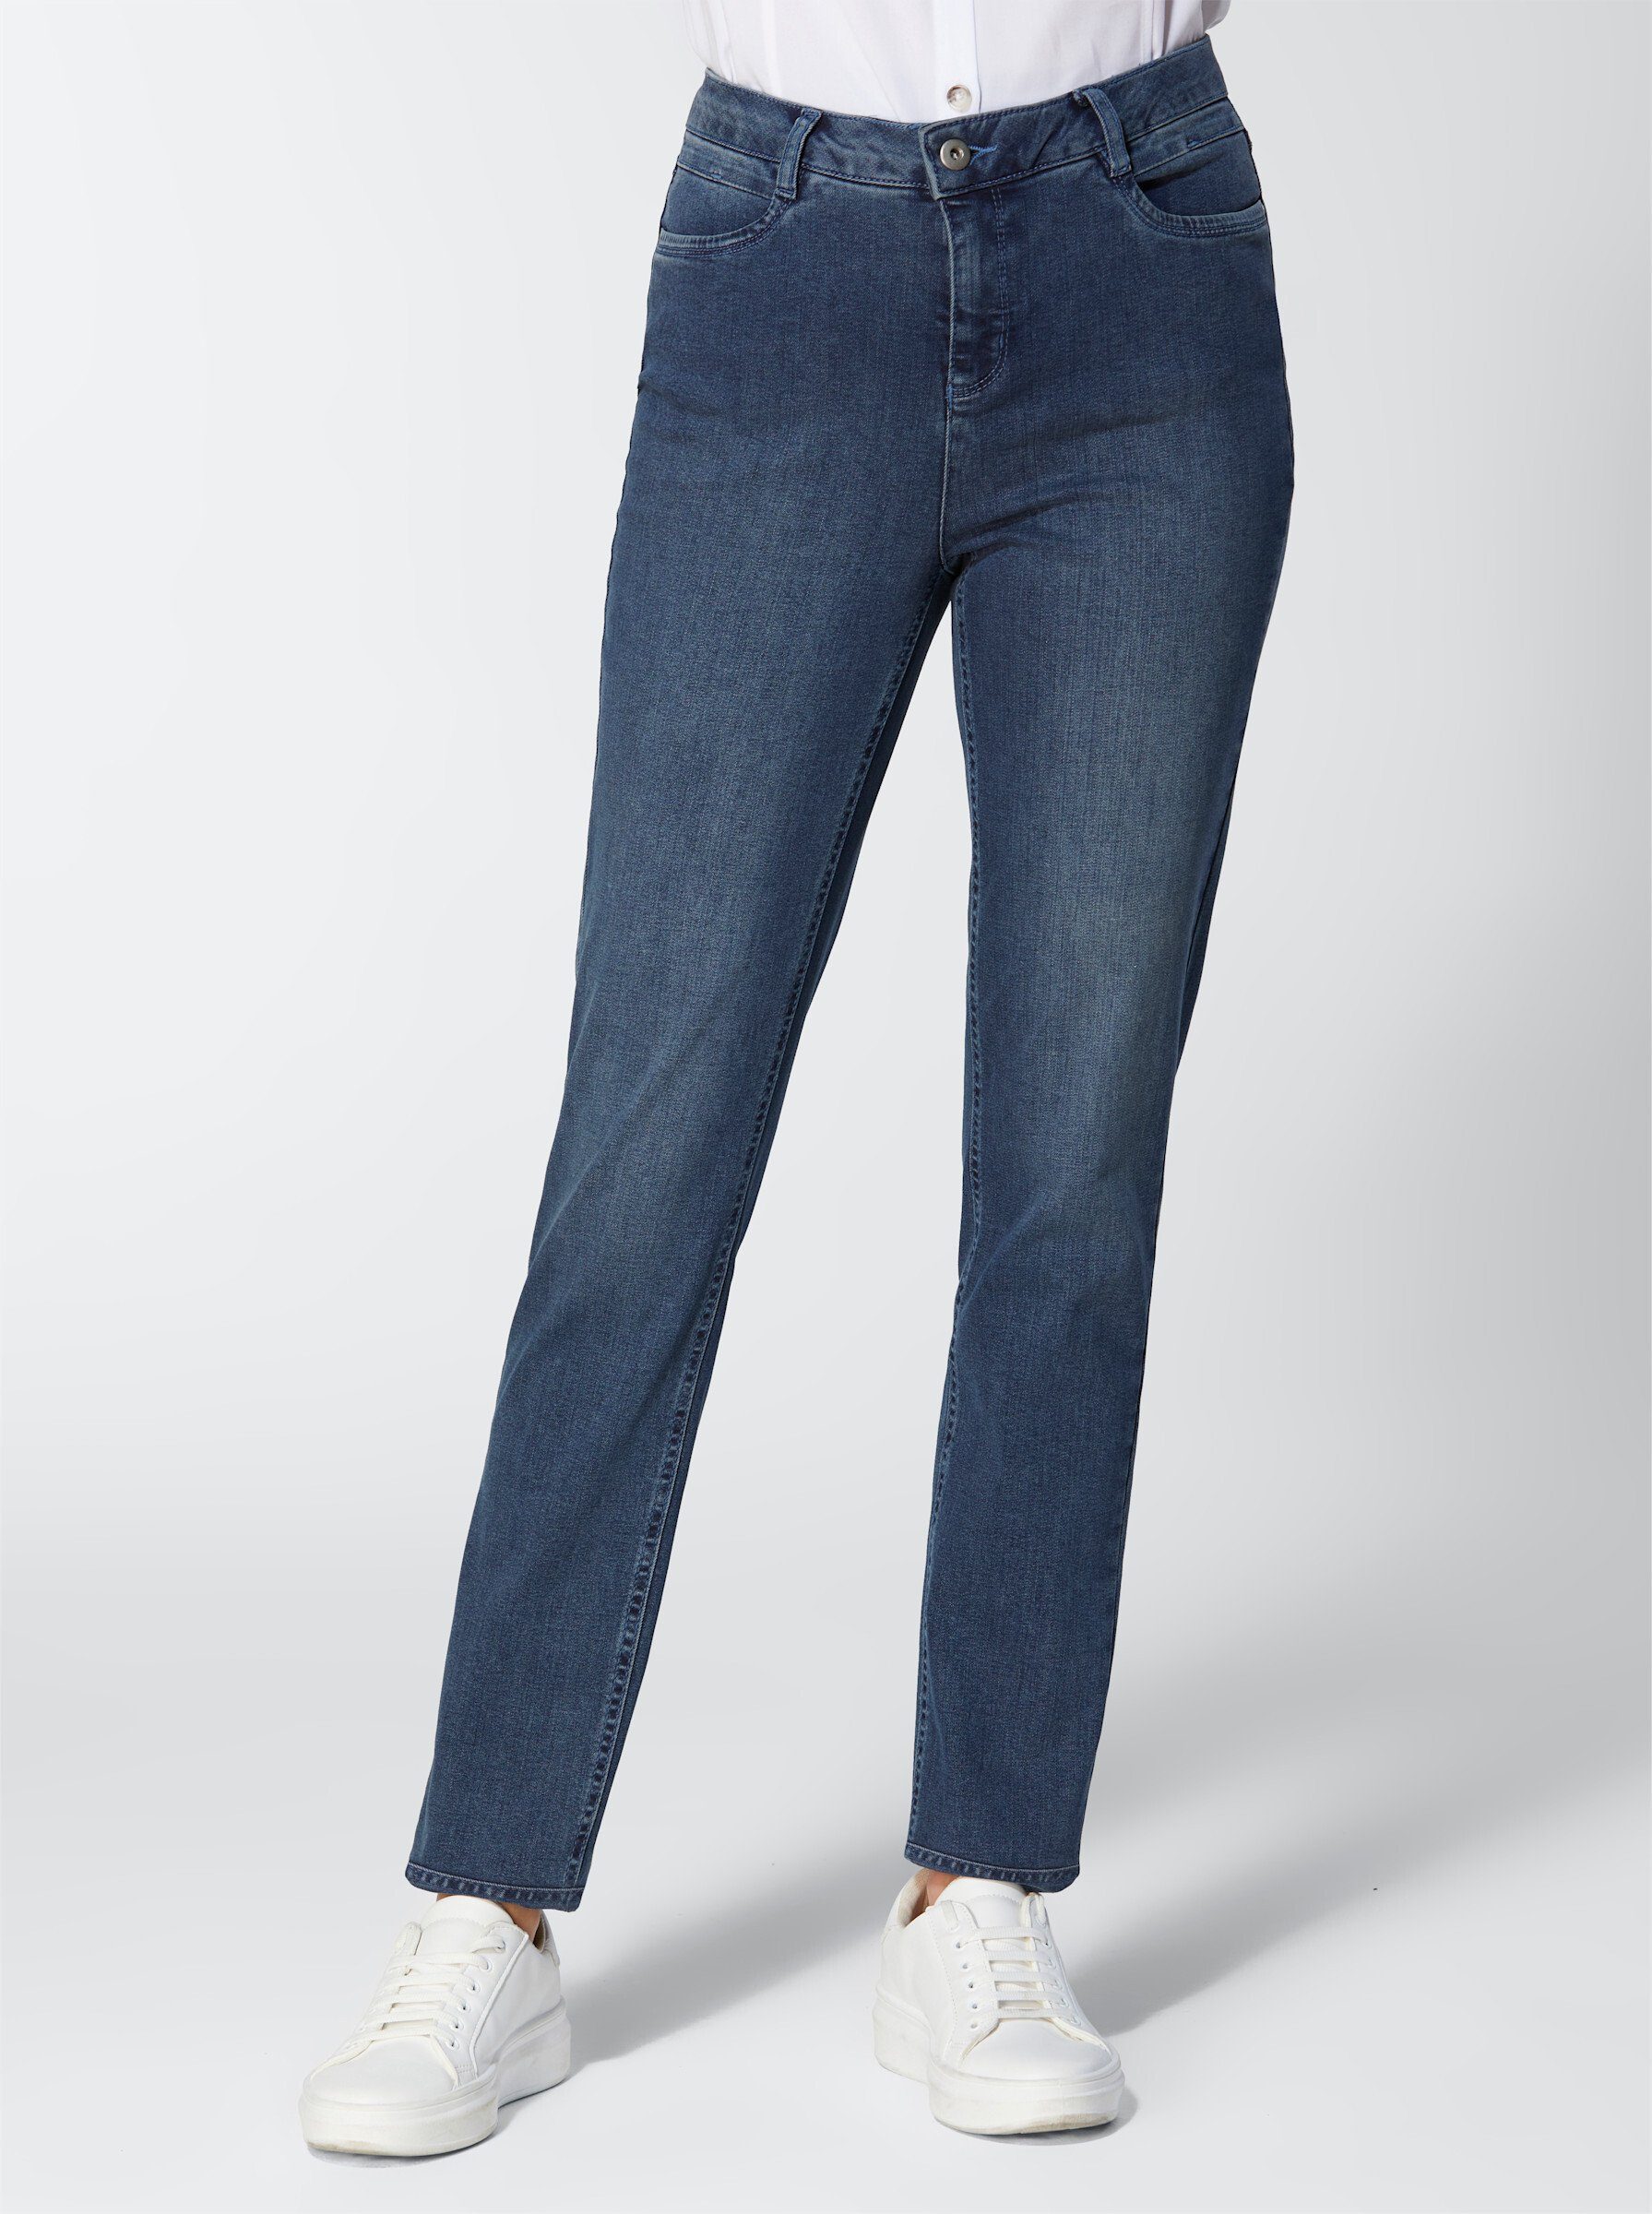 Bequeme Jeans creation blue-stone-washed L